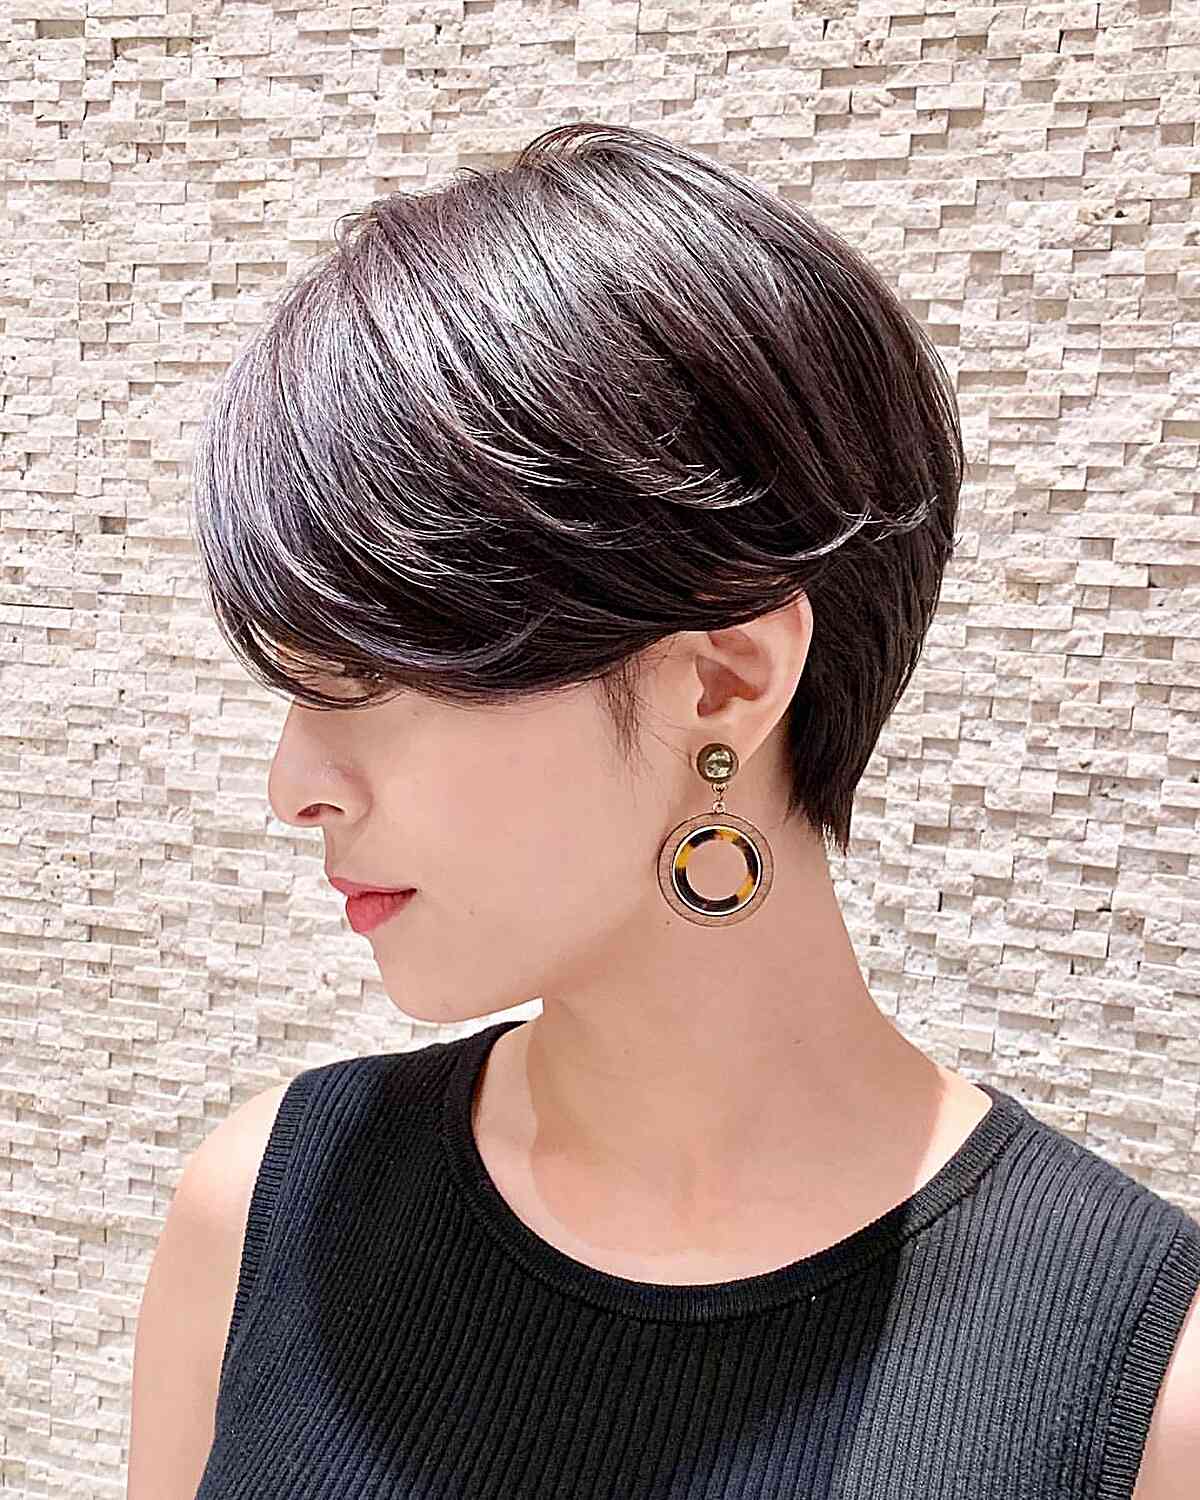 Short haircut with side swept bangs for Asian girl